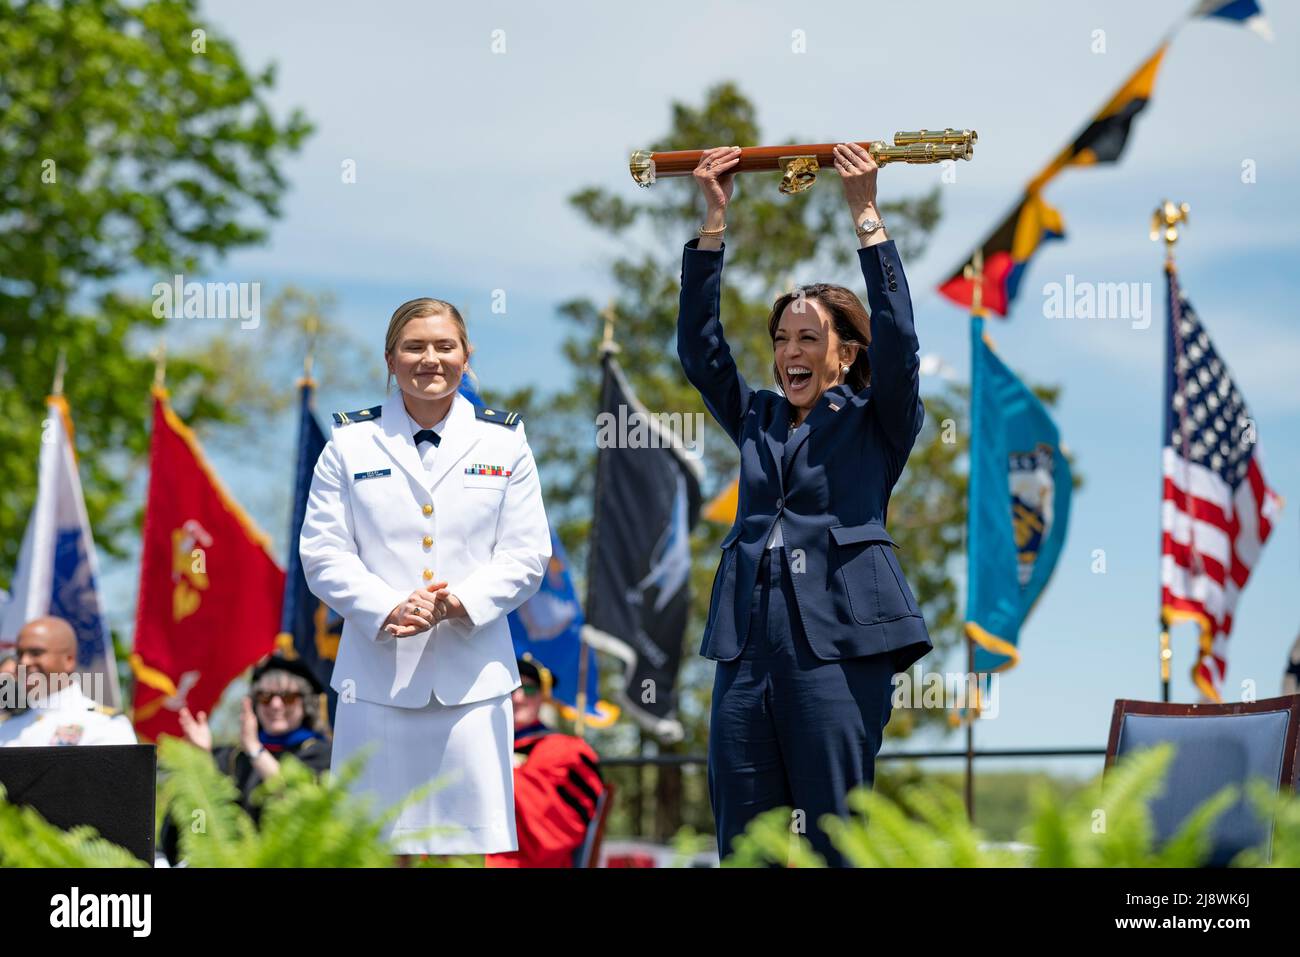 New London, United States of America. 18 May, 2022. U.S. Vice President Kamala Harris, lifts the school scepter over her head to mark the end of the 141st Commencement ceremony at the Coast Guard Academy, May 18, 2022 in New London, Connecticut. The Coast Guard Academy graduated 252 new officers along with nine international students. Credit: PO3 Matthew Thieme/U.S. Coast Guard Photo/Alamy Live News Stock Photo